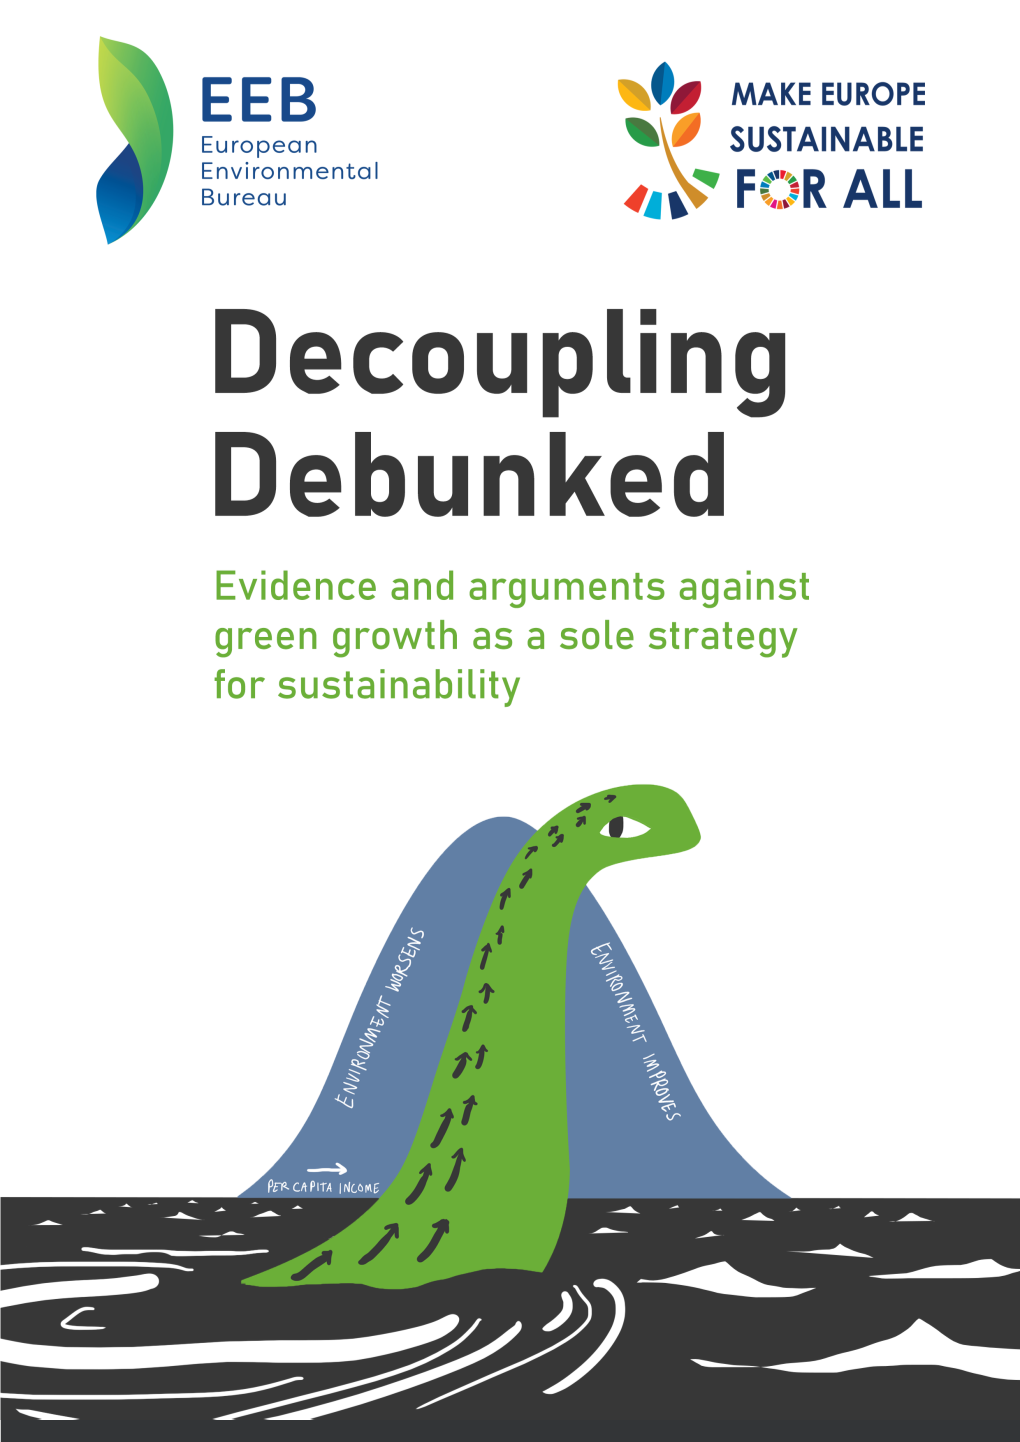 Decoupling Debunked: Evidence and Arguments Against Green Growth As a Sole Strategy for Sustainability